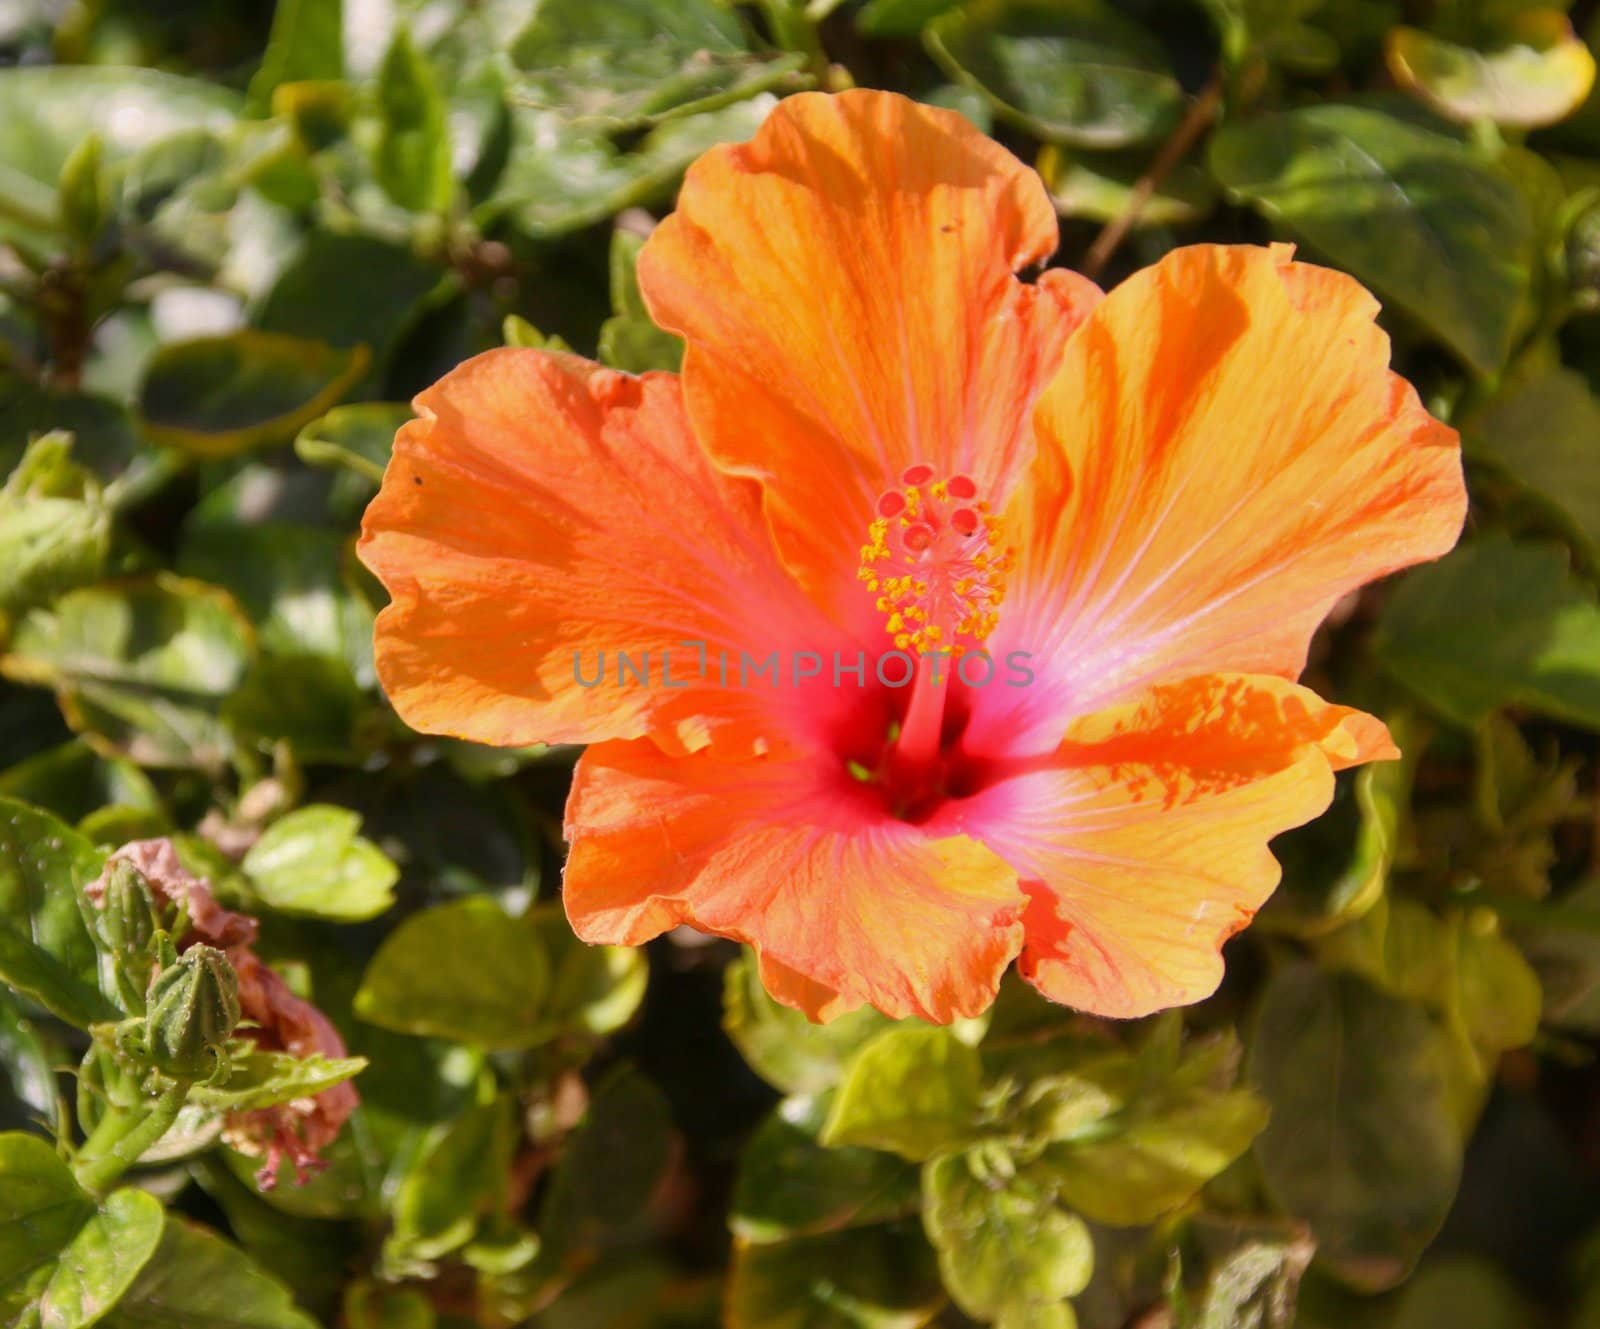 Orange Hibiscus flower and green leaves